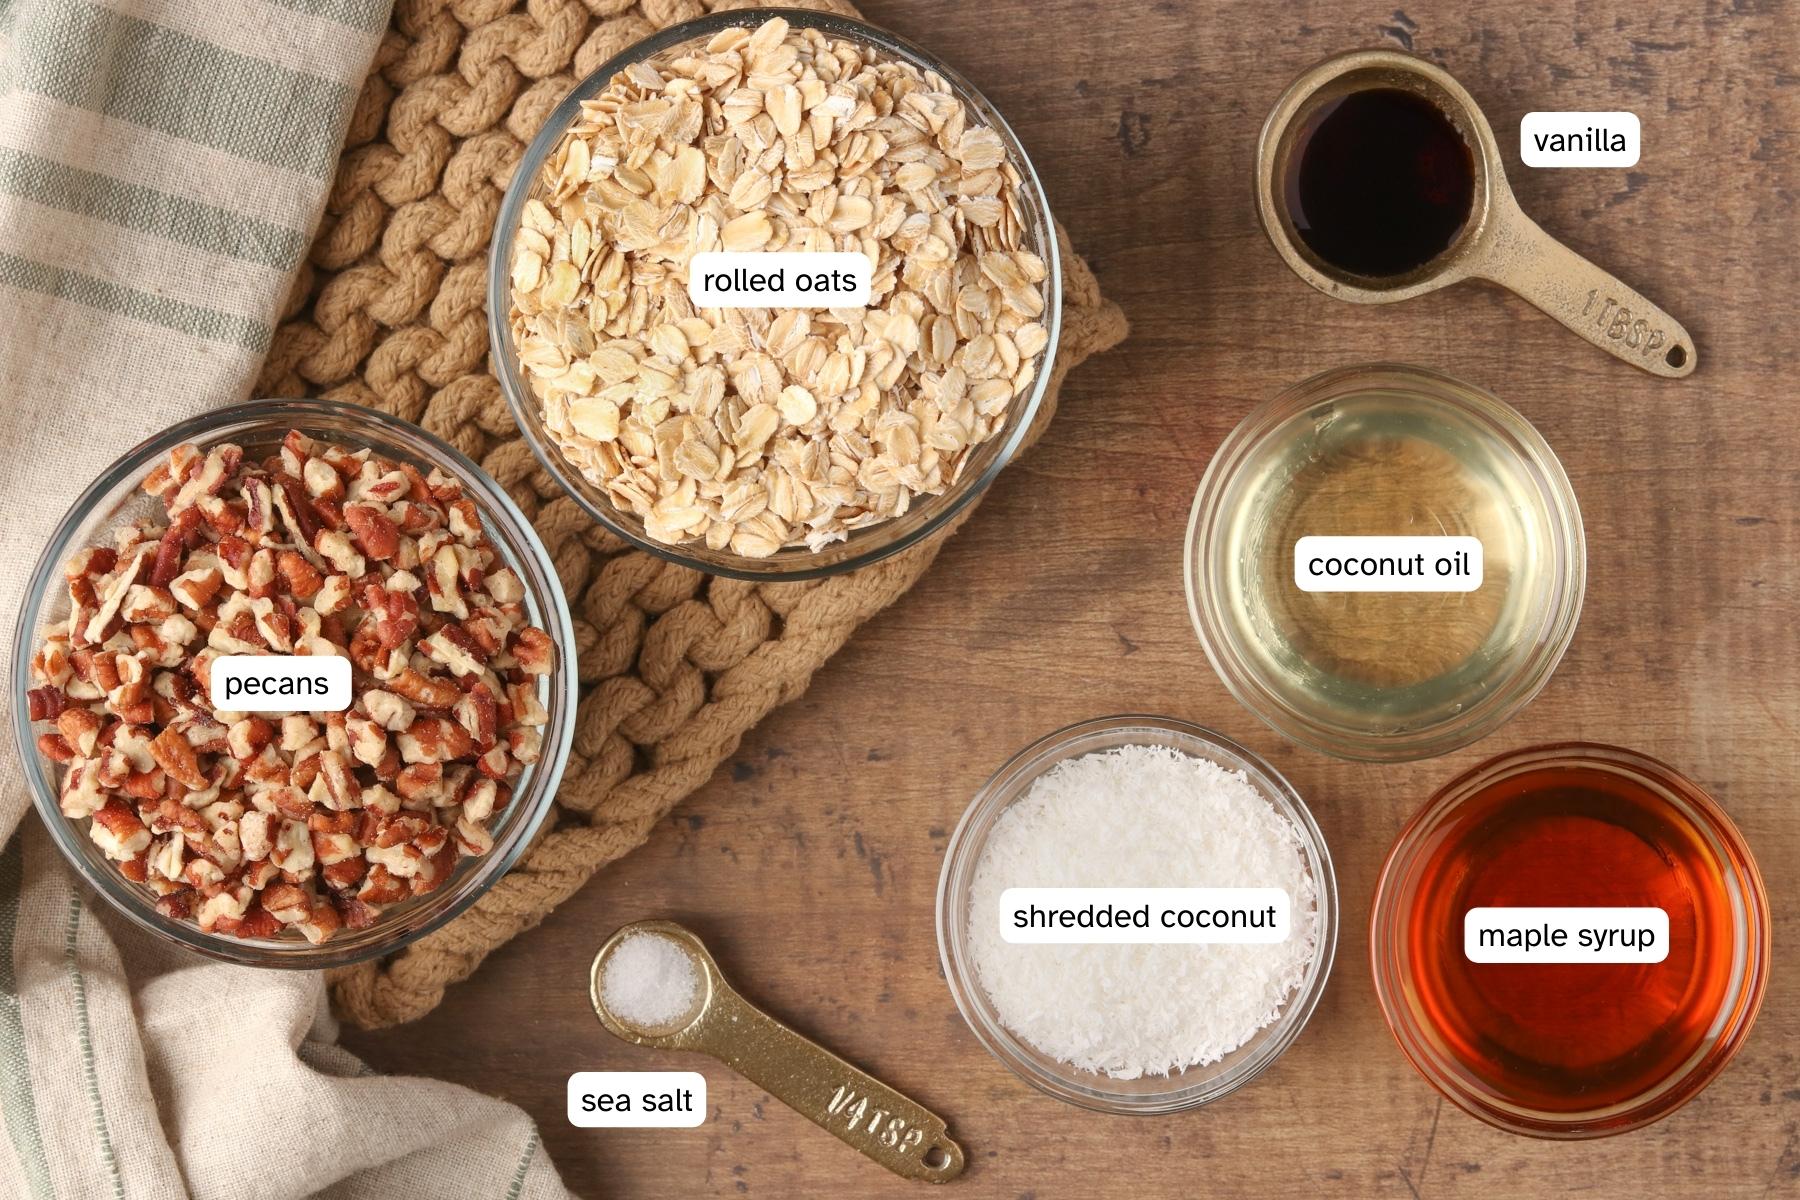 Ingredients to make crunchy chunky granola - rolled oats, pecans, salt, coconut, maple syrup, coconut oil and vanilla.